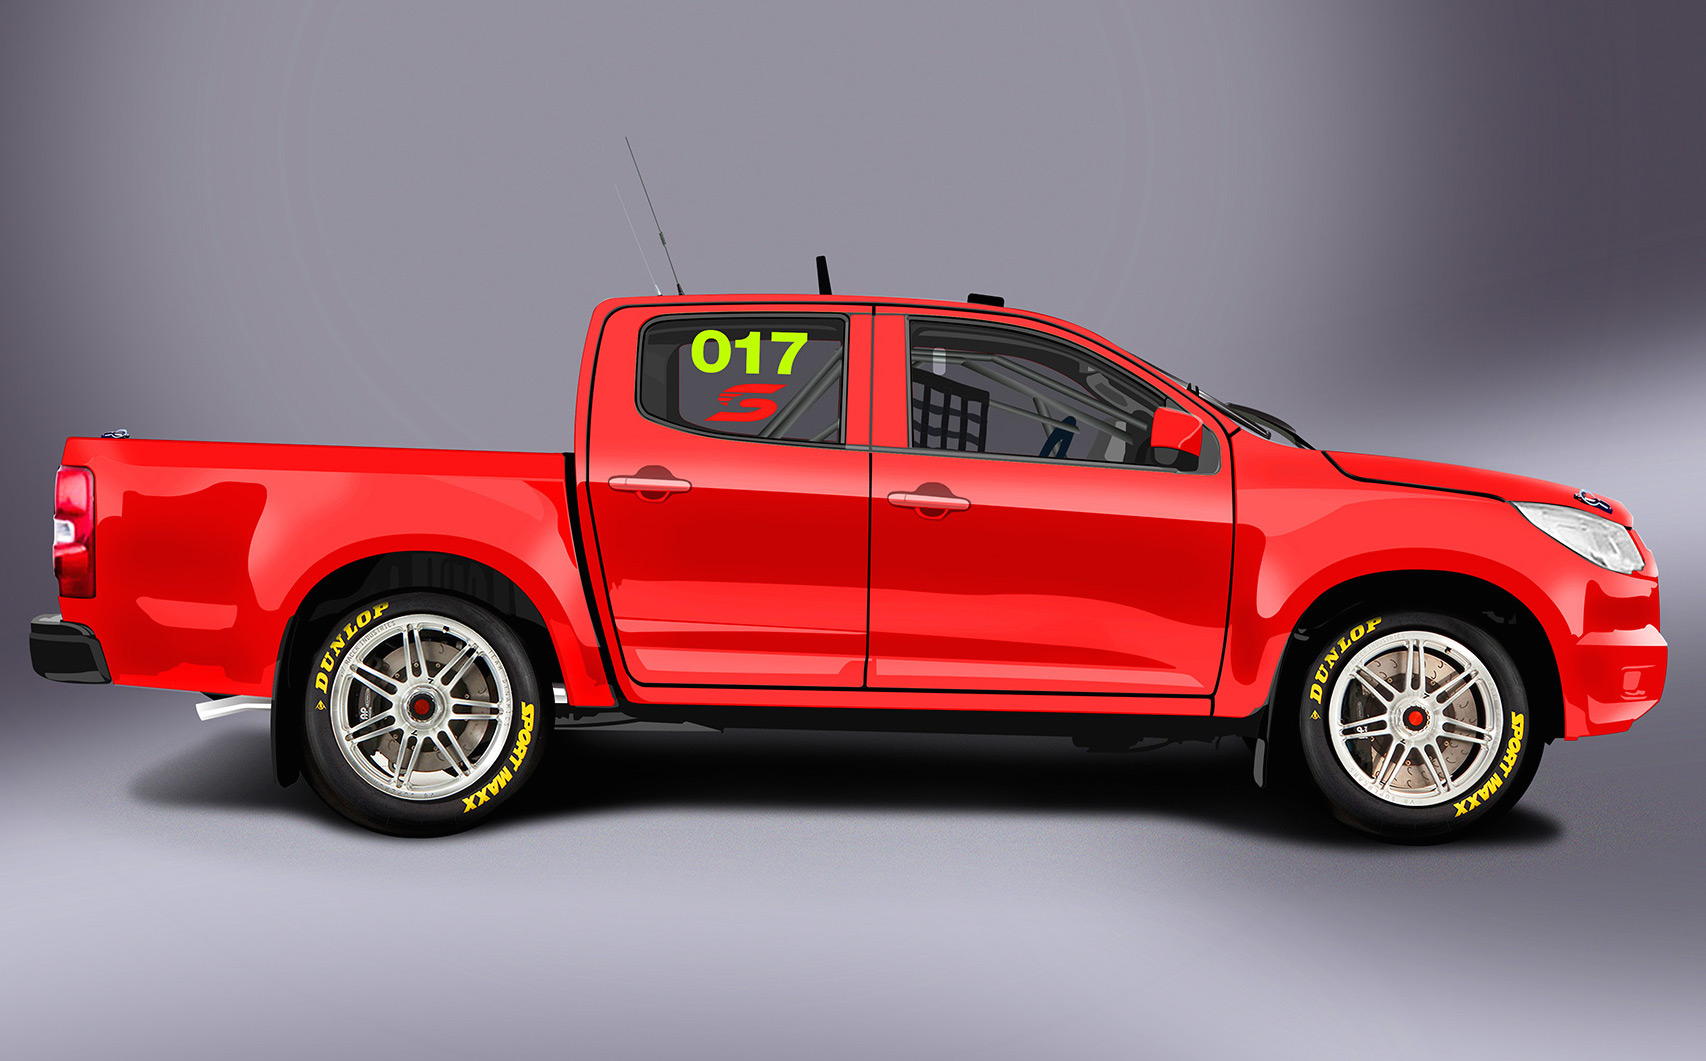 SuperUtes announced as new ute racing series in Australia